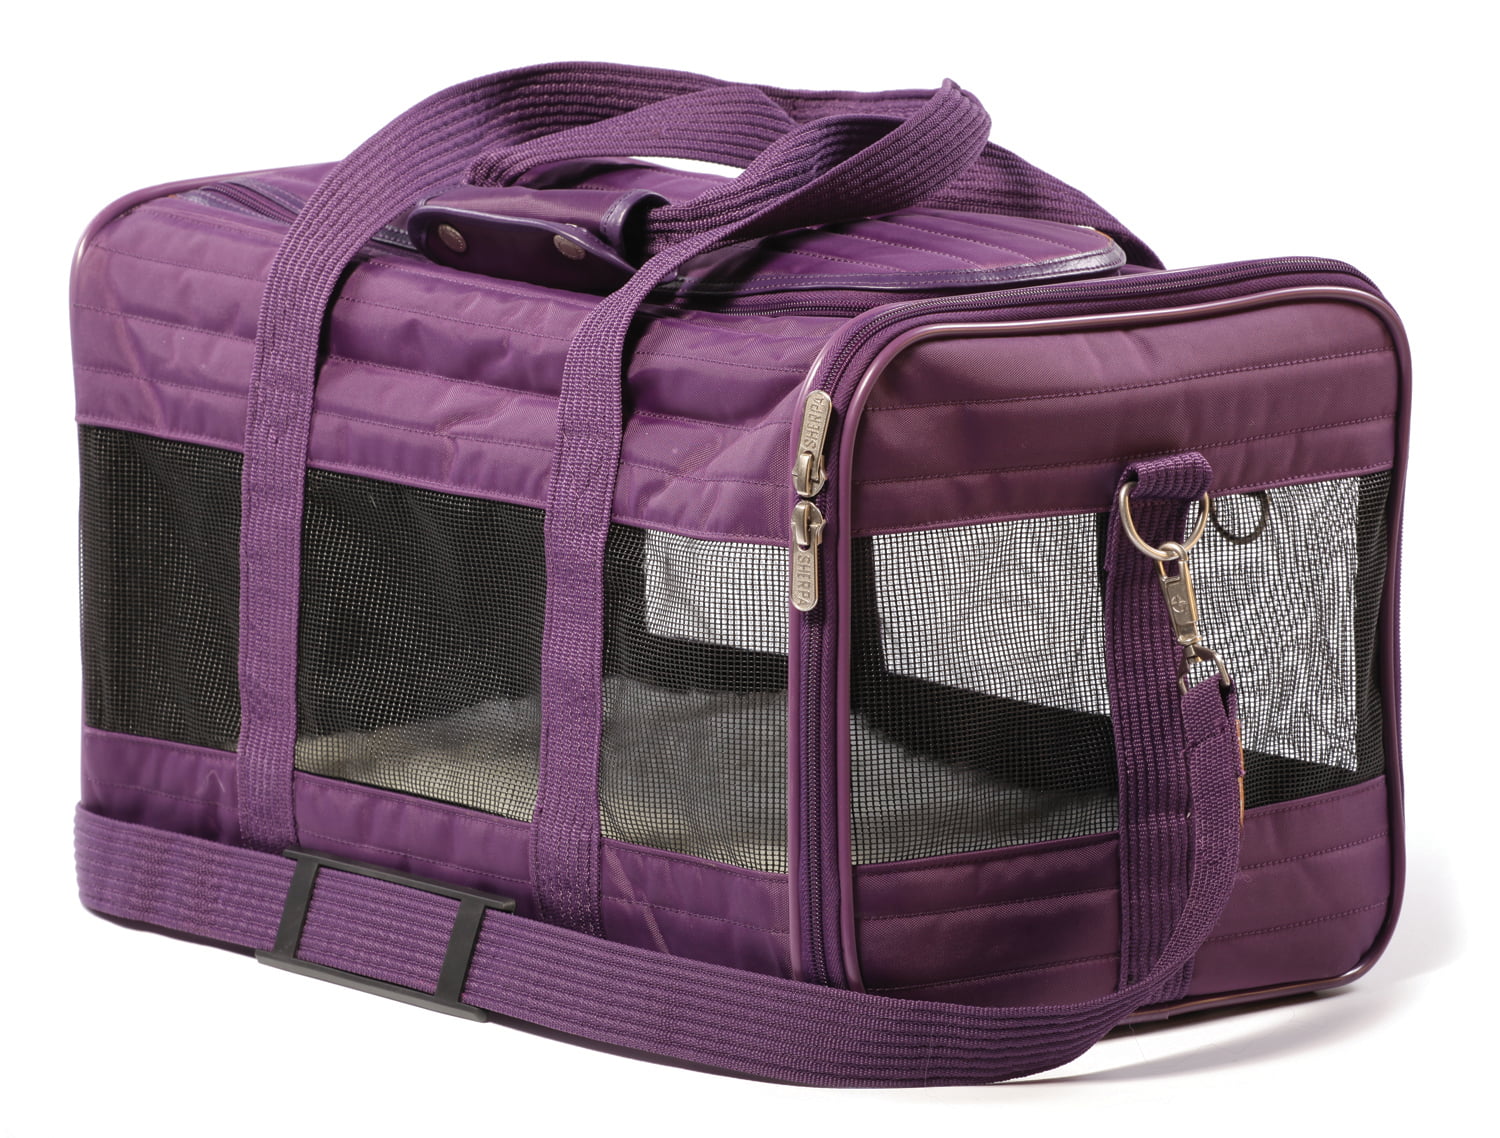 Sherpa Original Deluxe™ Pet Carrier Small Plum - Chirp N Dales Pet Supply